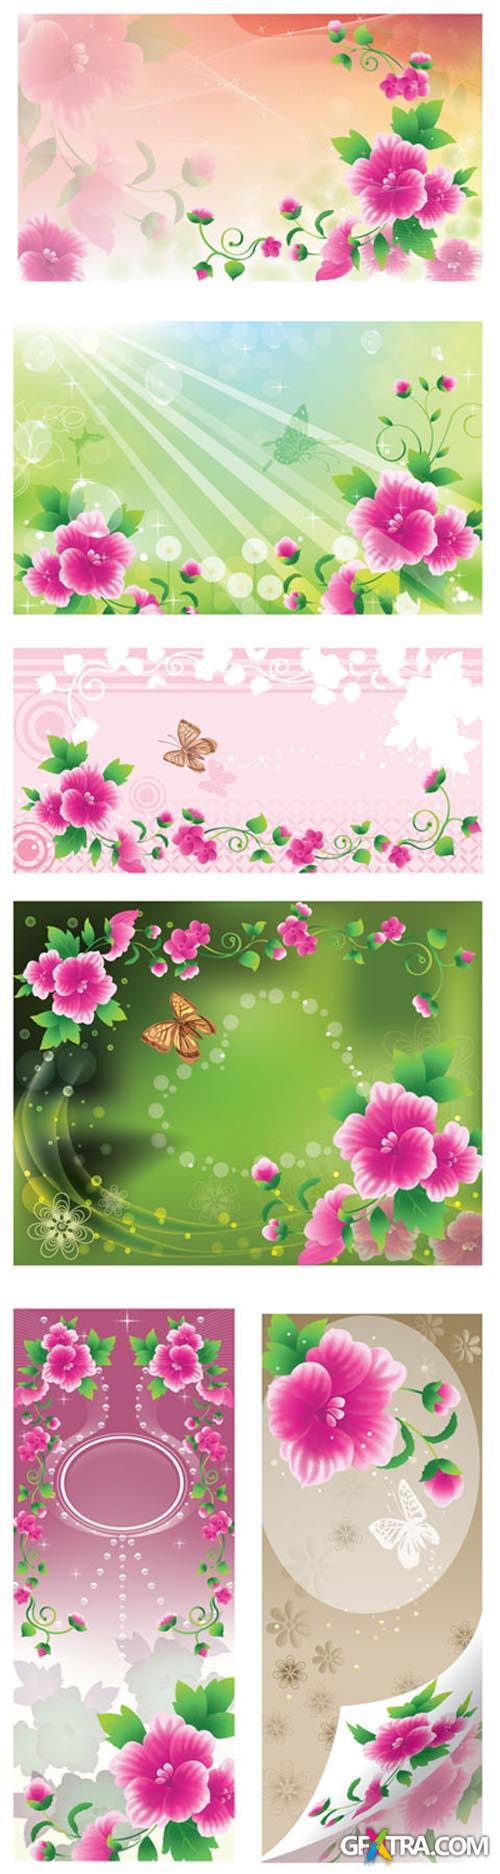 Spring vector banners with pink flowers